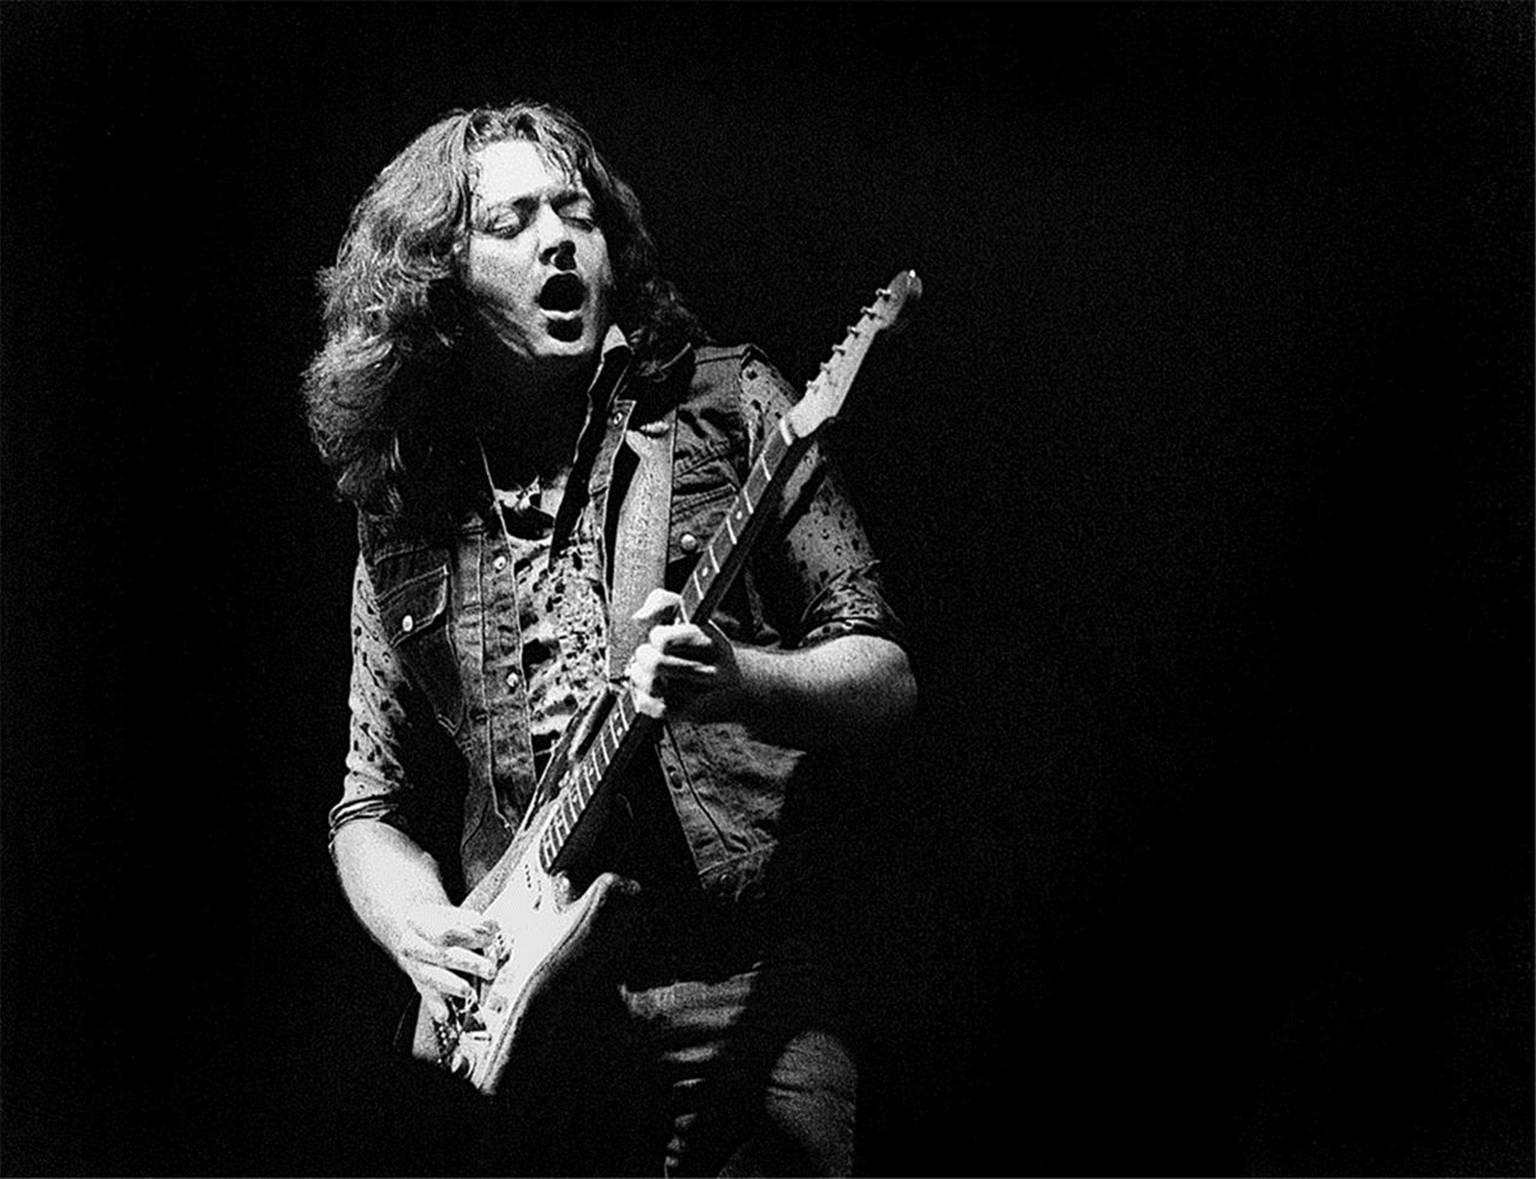 Colm Henry Black and White Photograph – Der Rory Gallagher, Dublin, 1981